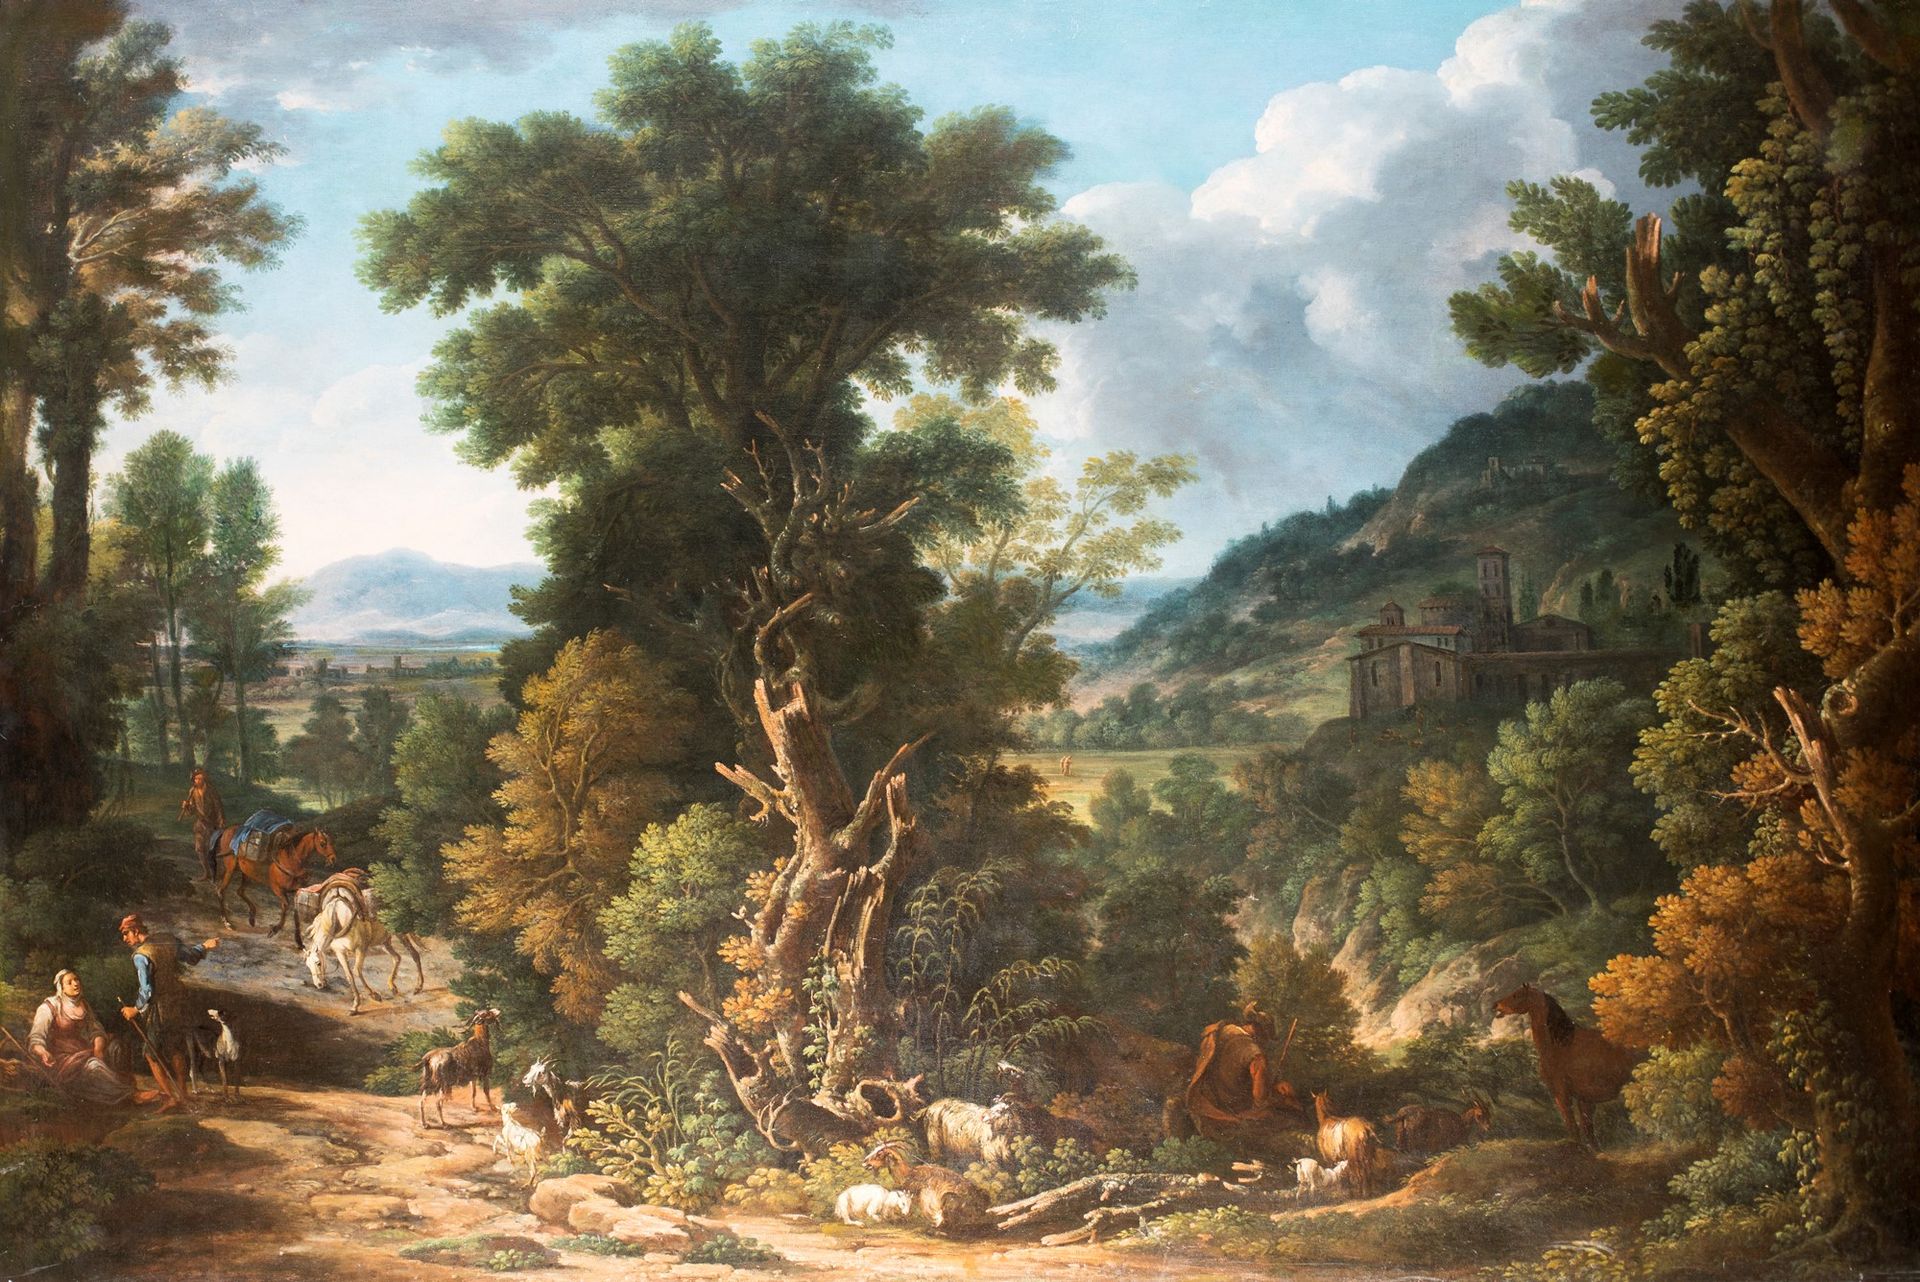 Pittore romano del XVII secolo Landscape with knights and flocks 画布上的油画